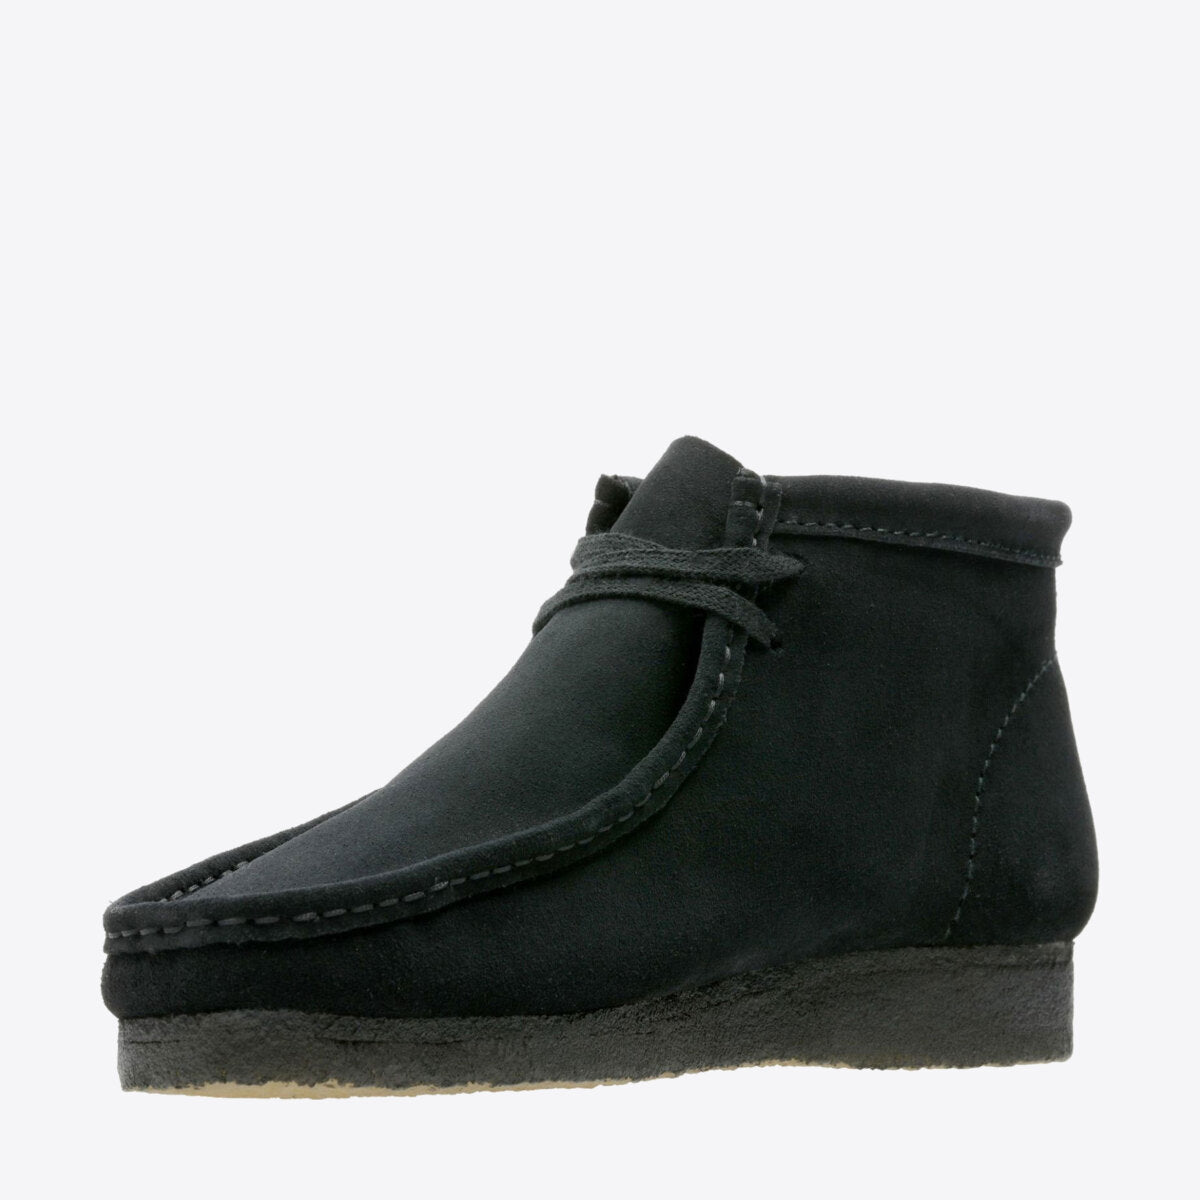 CLARKS Wallabee Boot Suede Black - Image 4